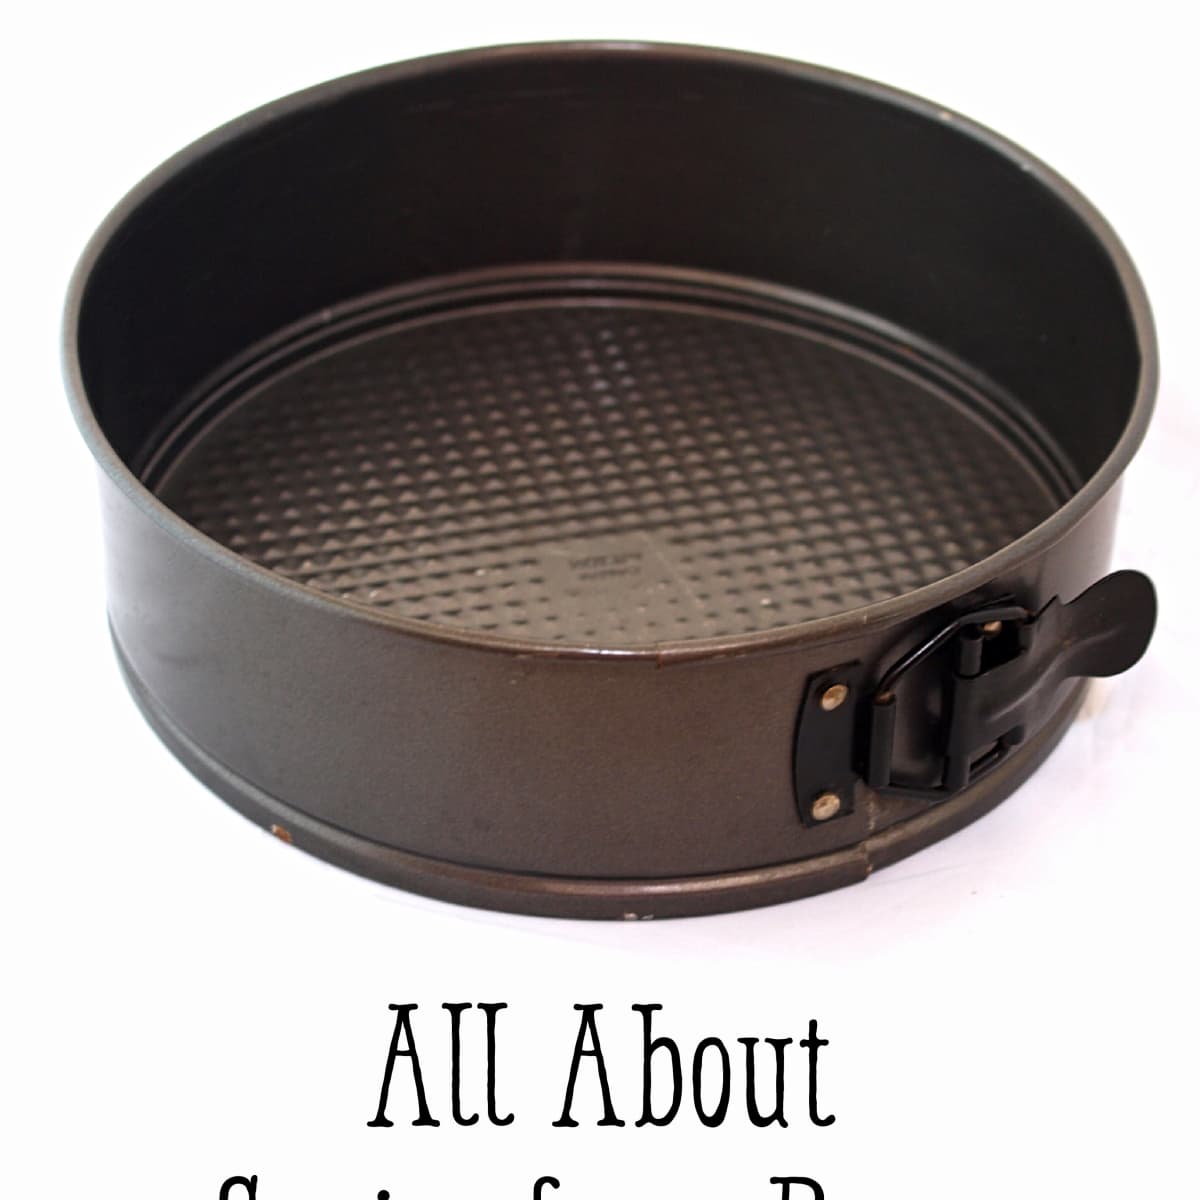 Springform Pan 101: What is a Springform Pan and How Do You Use It, Wilton's Baking Blog